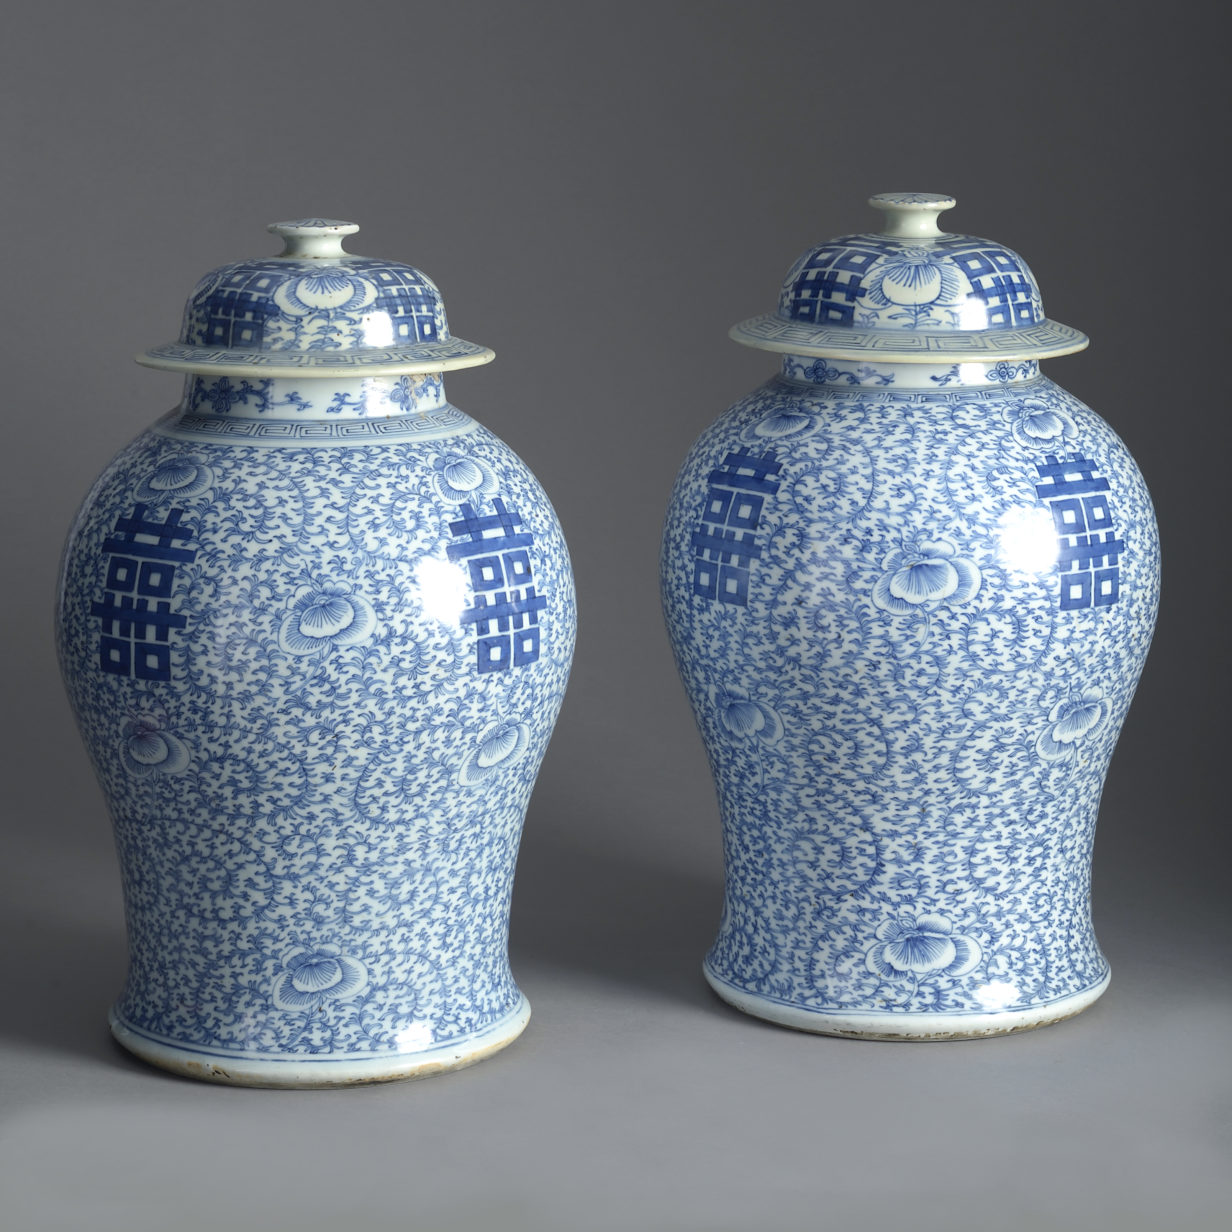 19th century pair of blue and white porcelain vases and covers